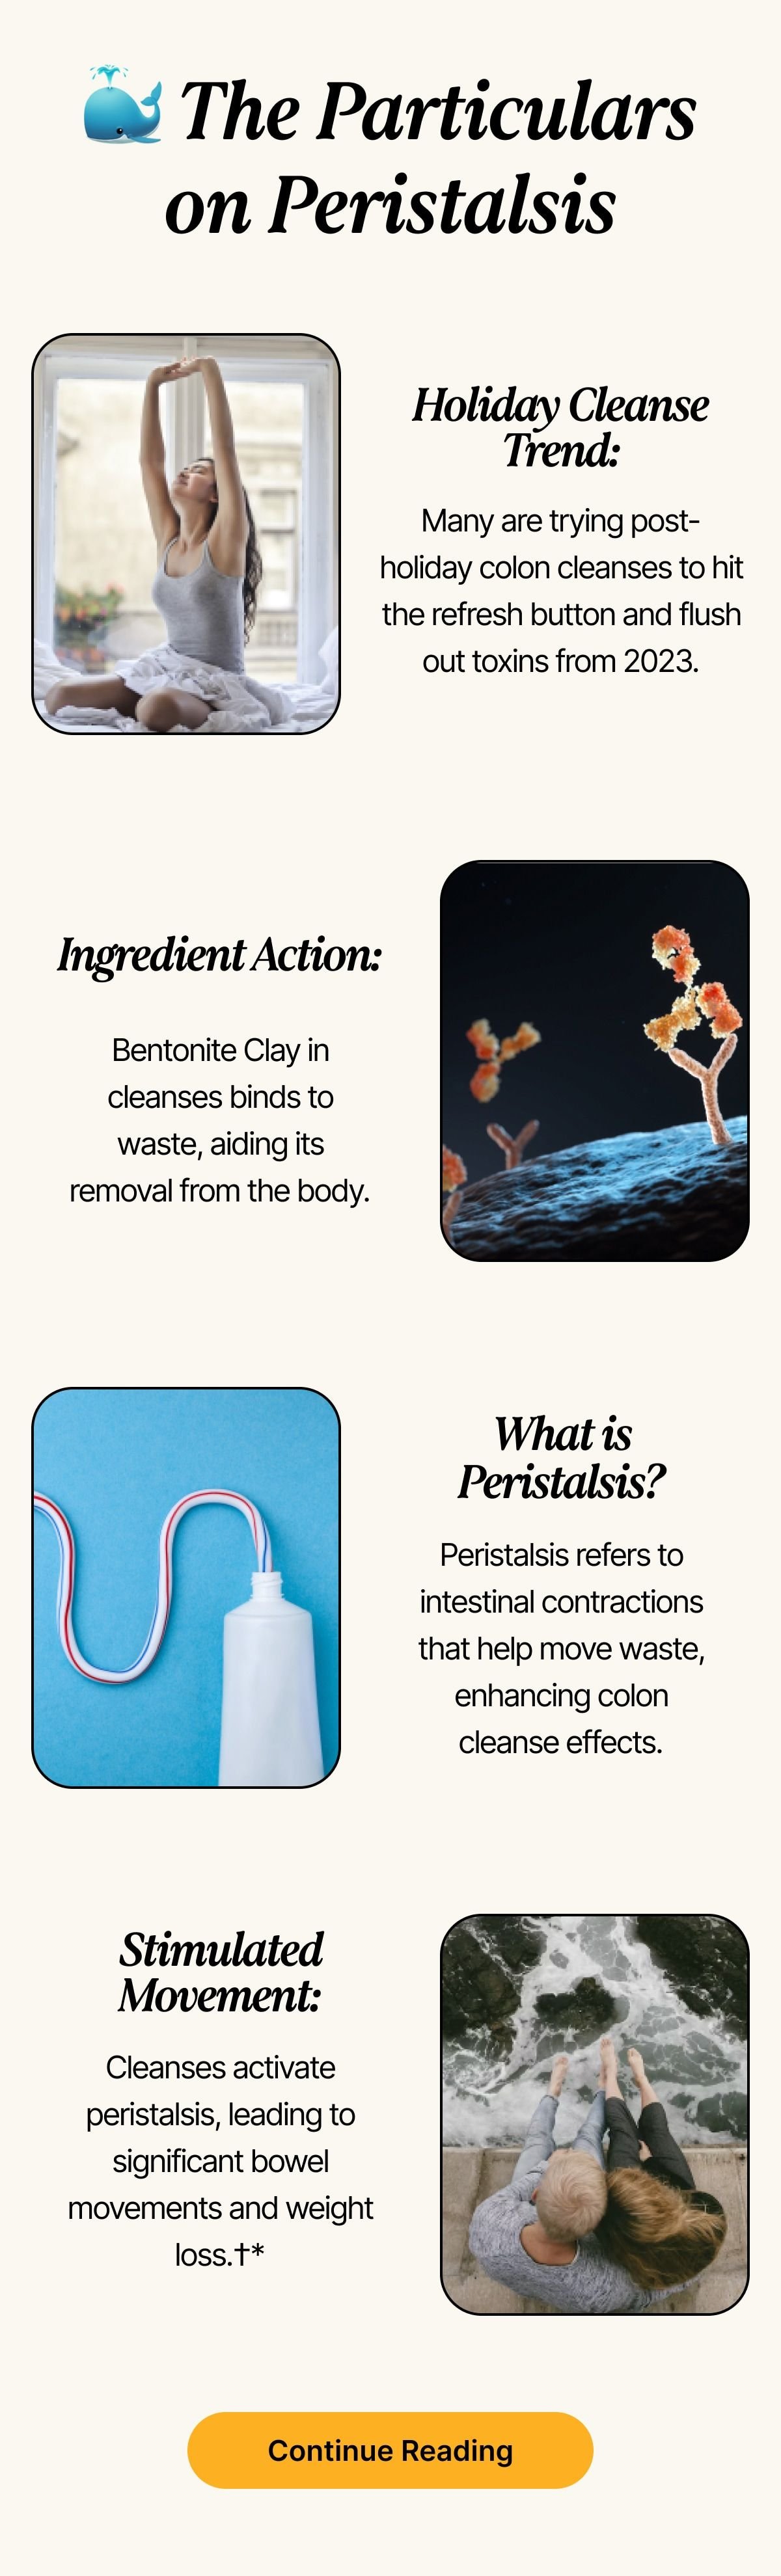 The Particulars on Peristalsis